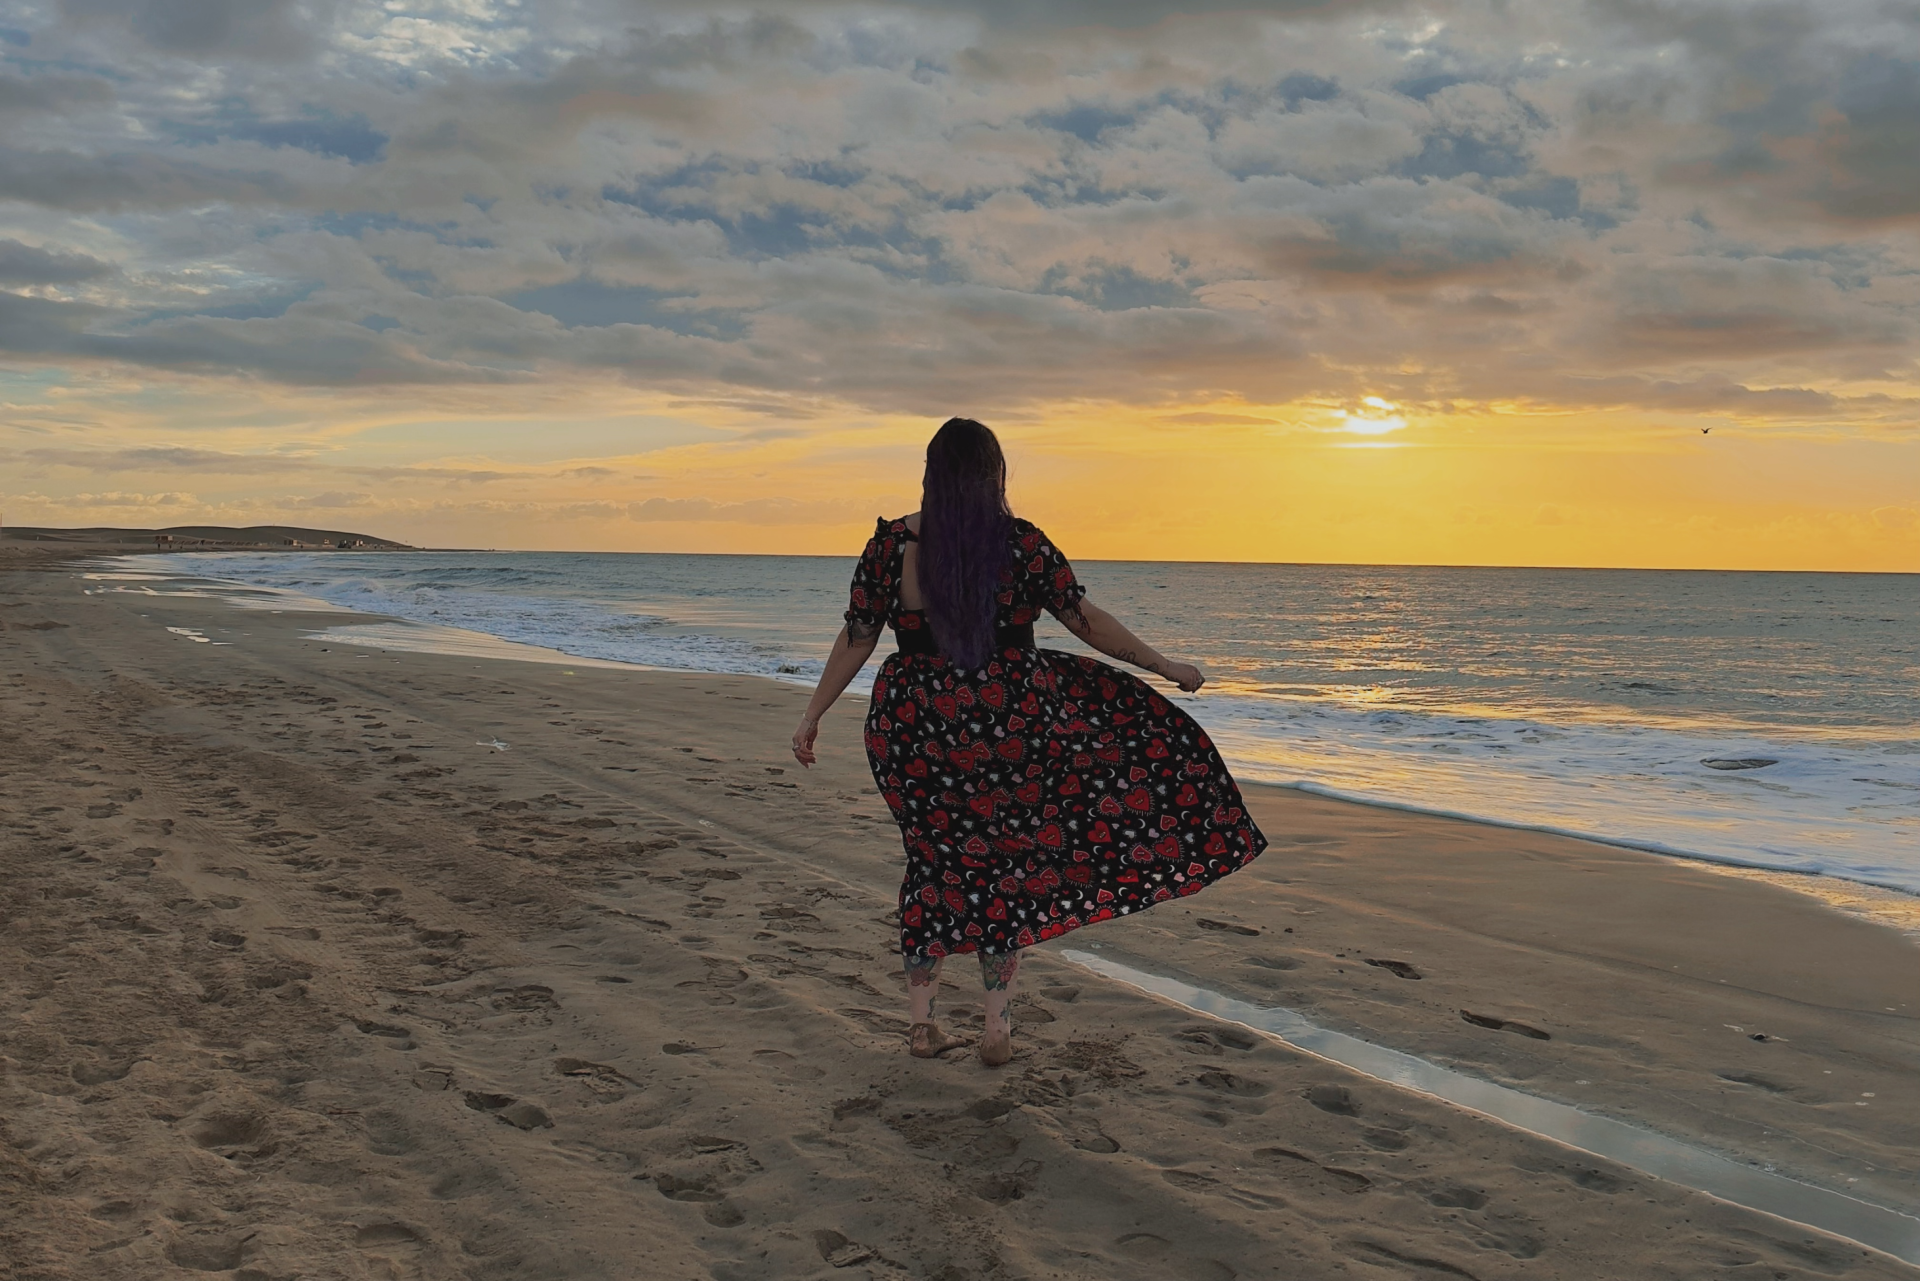 Luisa is looking out to sea with a gorgeous yellow sunrise in front of her, experiencing solo travel for the first time